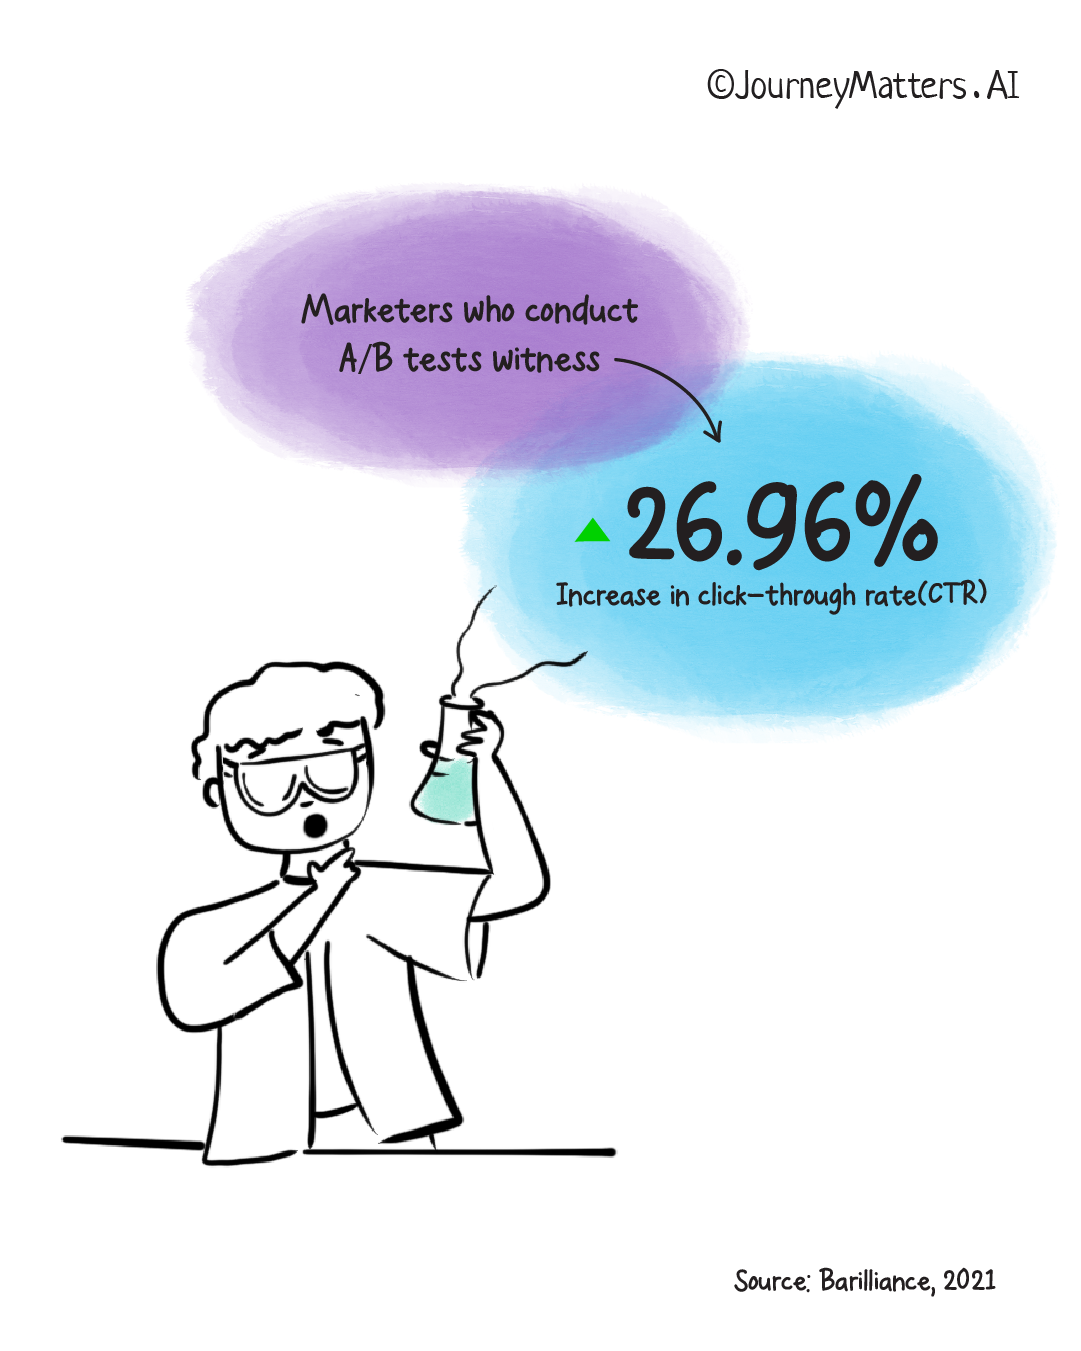 A/B testing of email subject lines can boost CTR by 26.96%